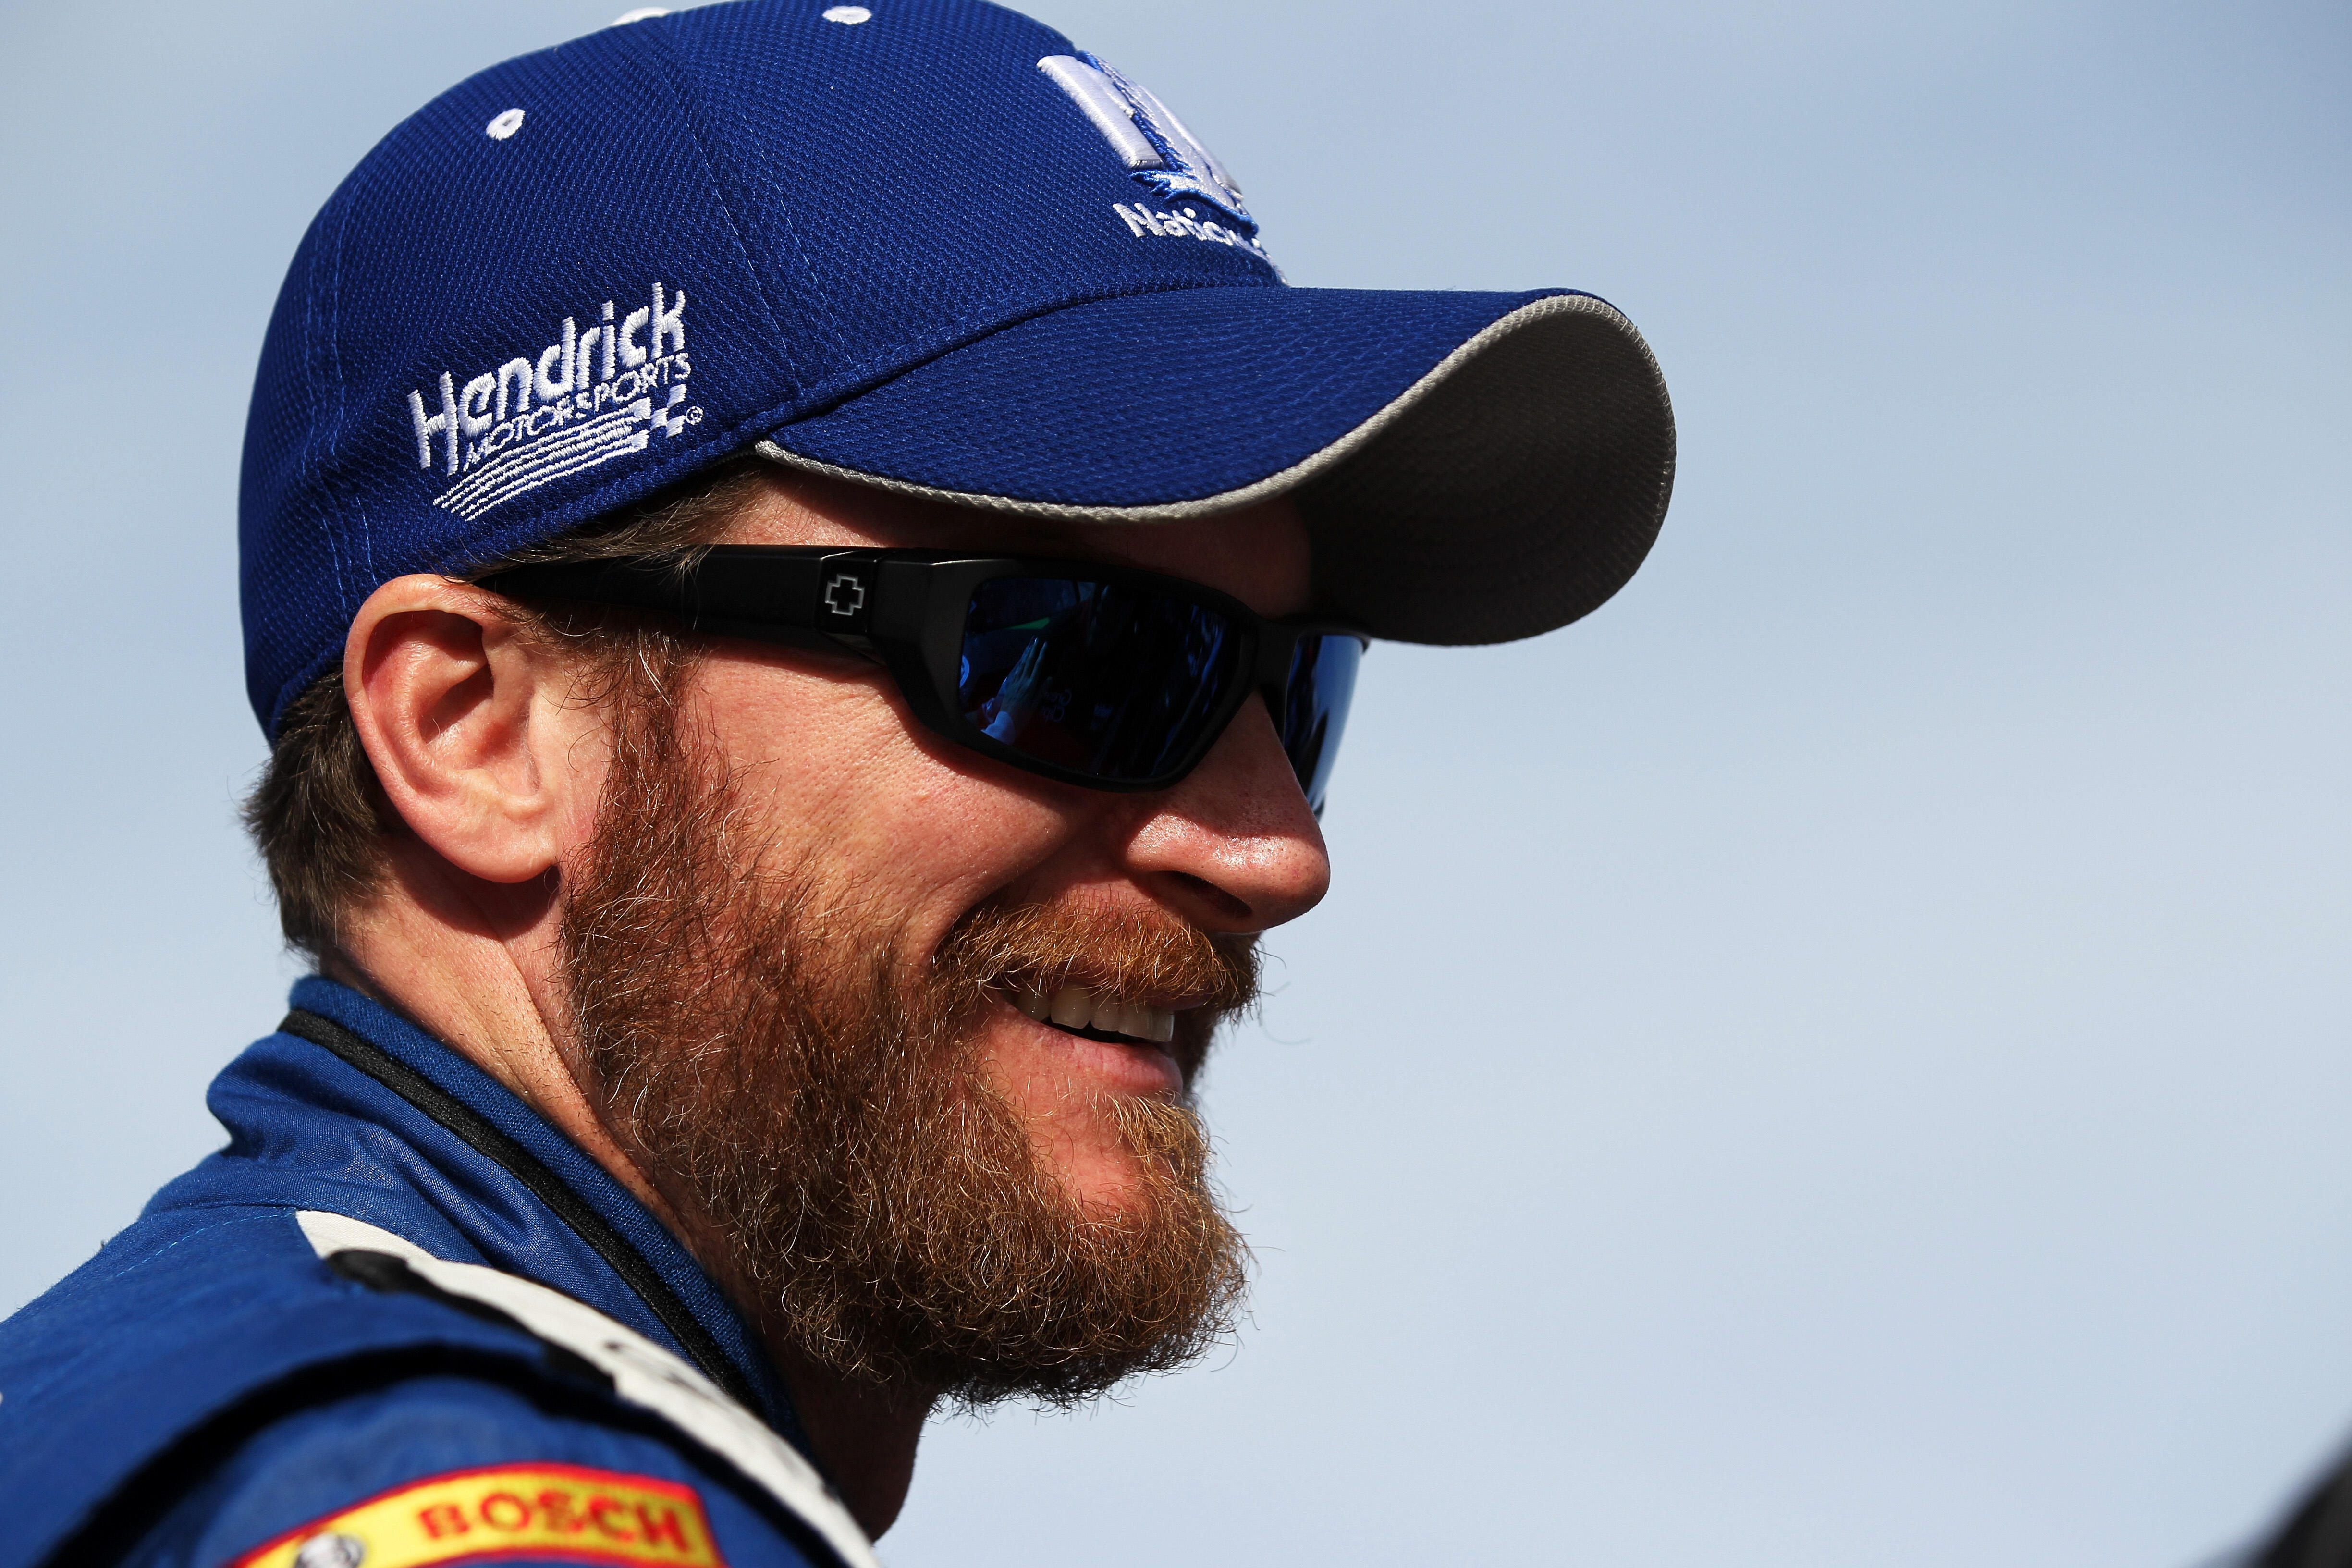 FORT WORTH, TX - APRIL 10:  Dale Earnhardt, Jr., driver of the #88 Goody's Chevrolet, looks on from the grid during qualifying for the NASCAR Sprint Cup Series Duck Commander 500 at Texas Motor Speedway on April 10, 2015 in Fort Worth, Texas.  (Photo by S